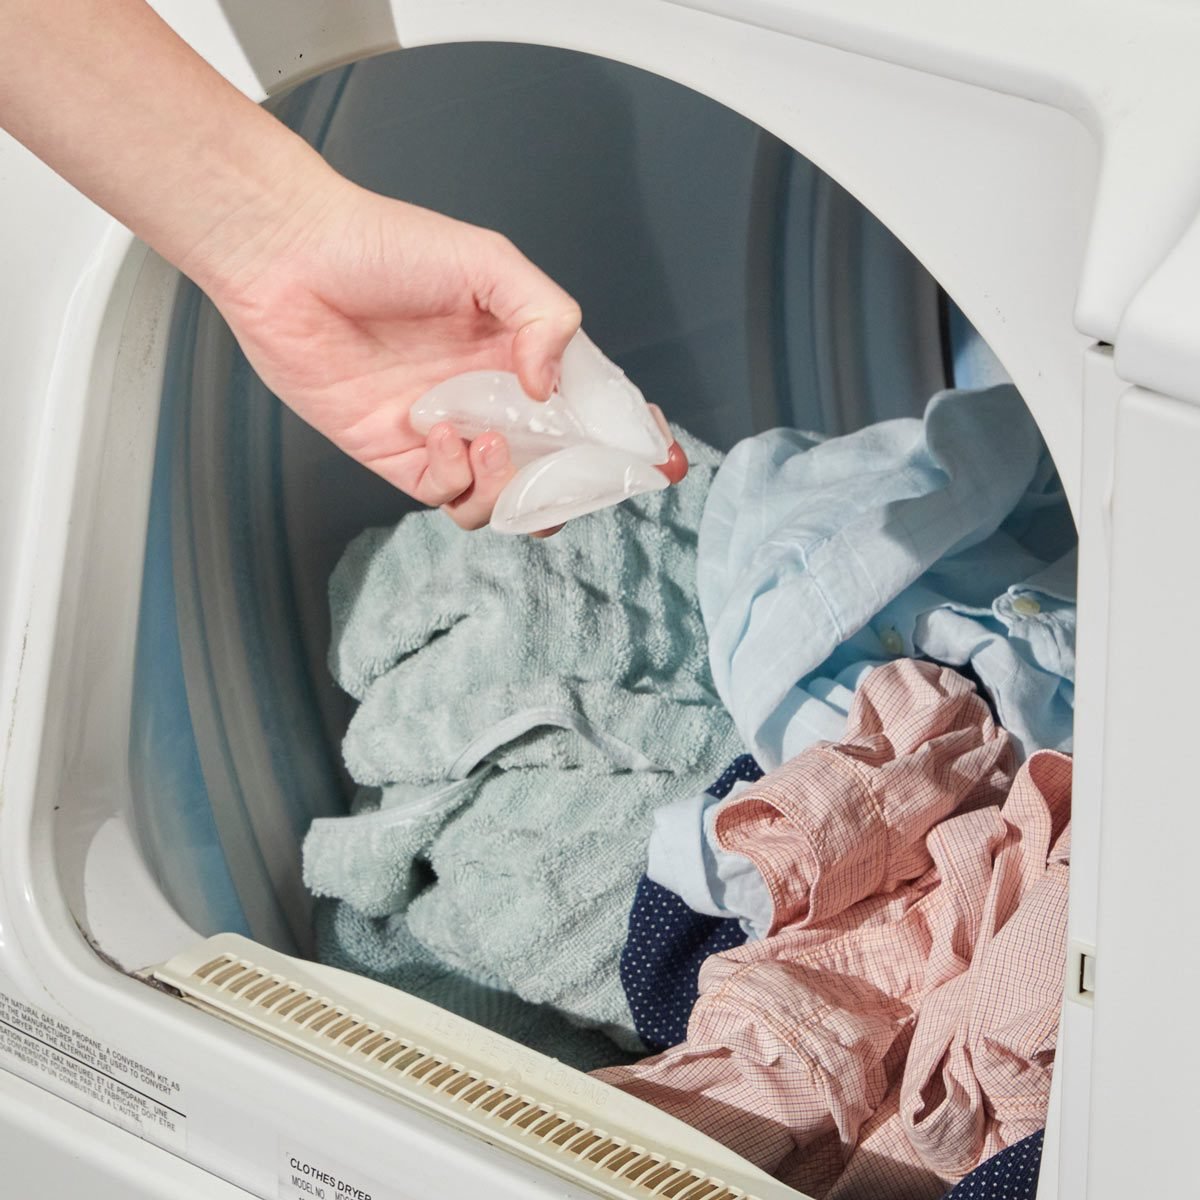 Hacks for drying clothes - Laundryheap Blog - Laundry & Dry Cleaning